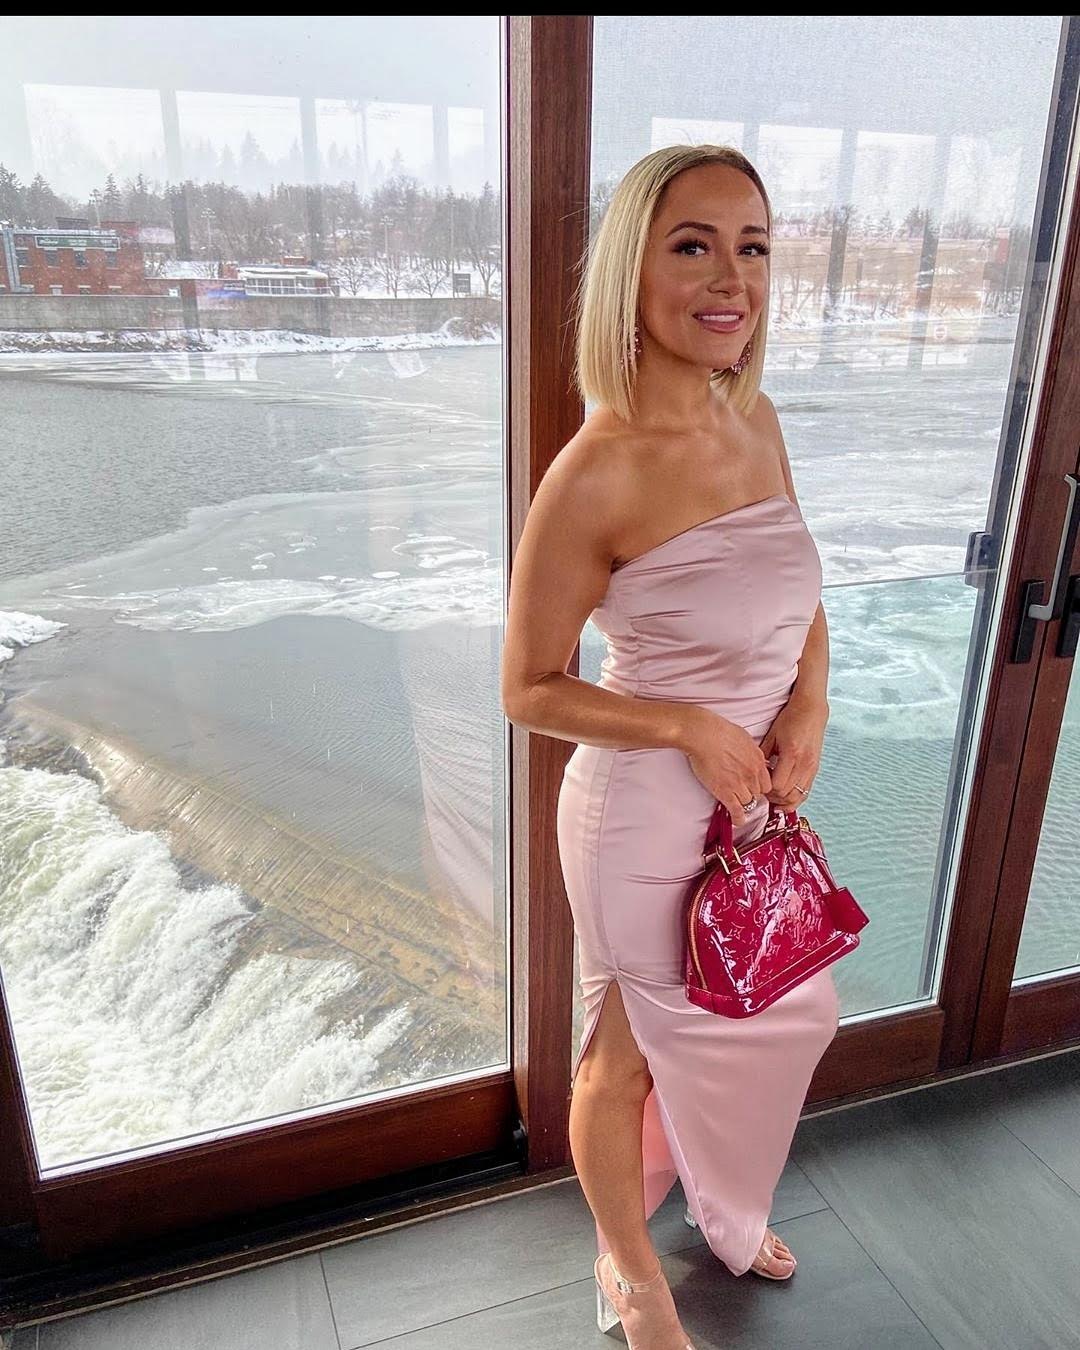 A woman in pink dress holding onto a purse